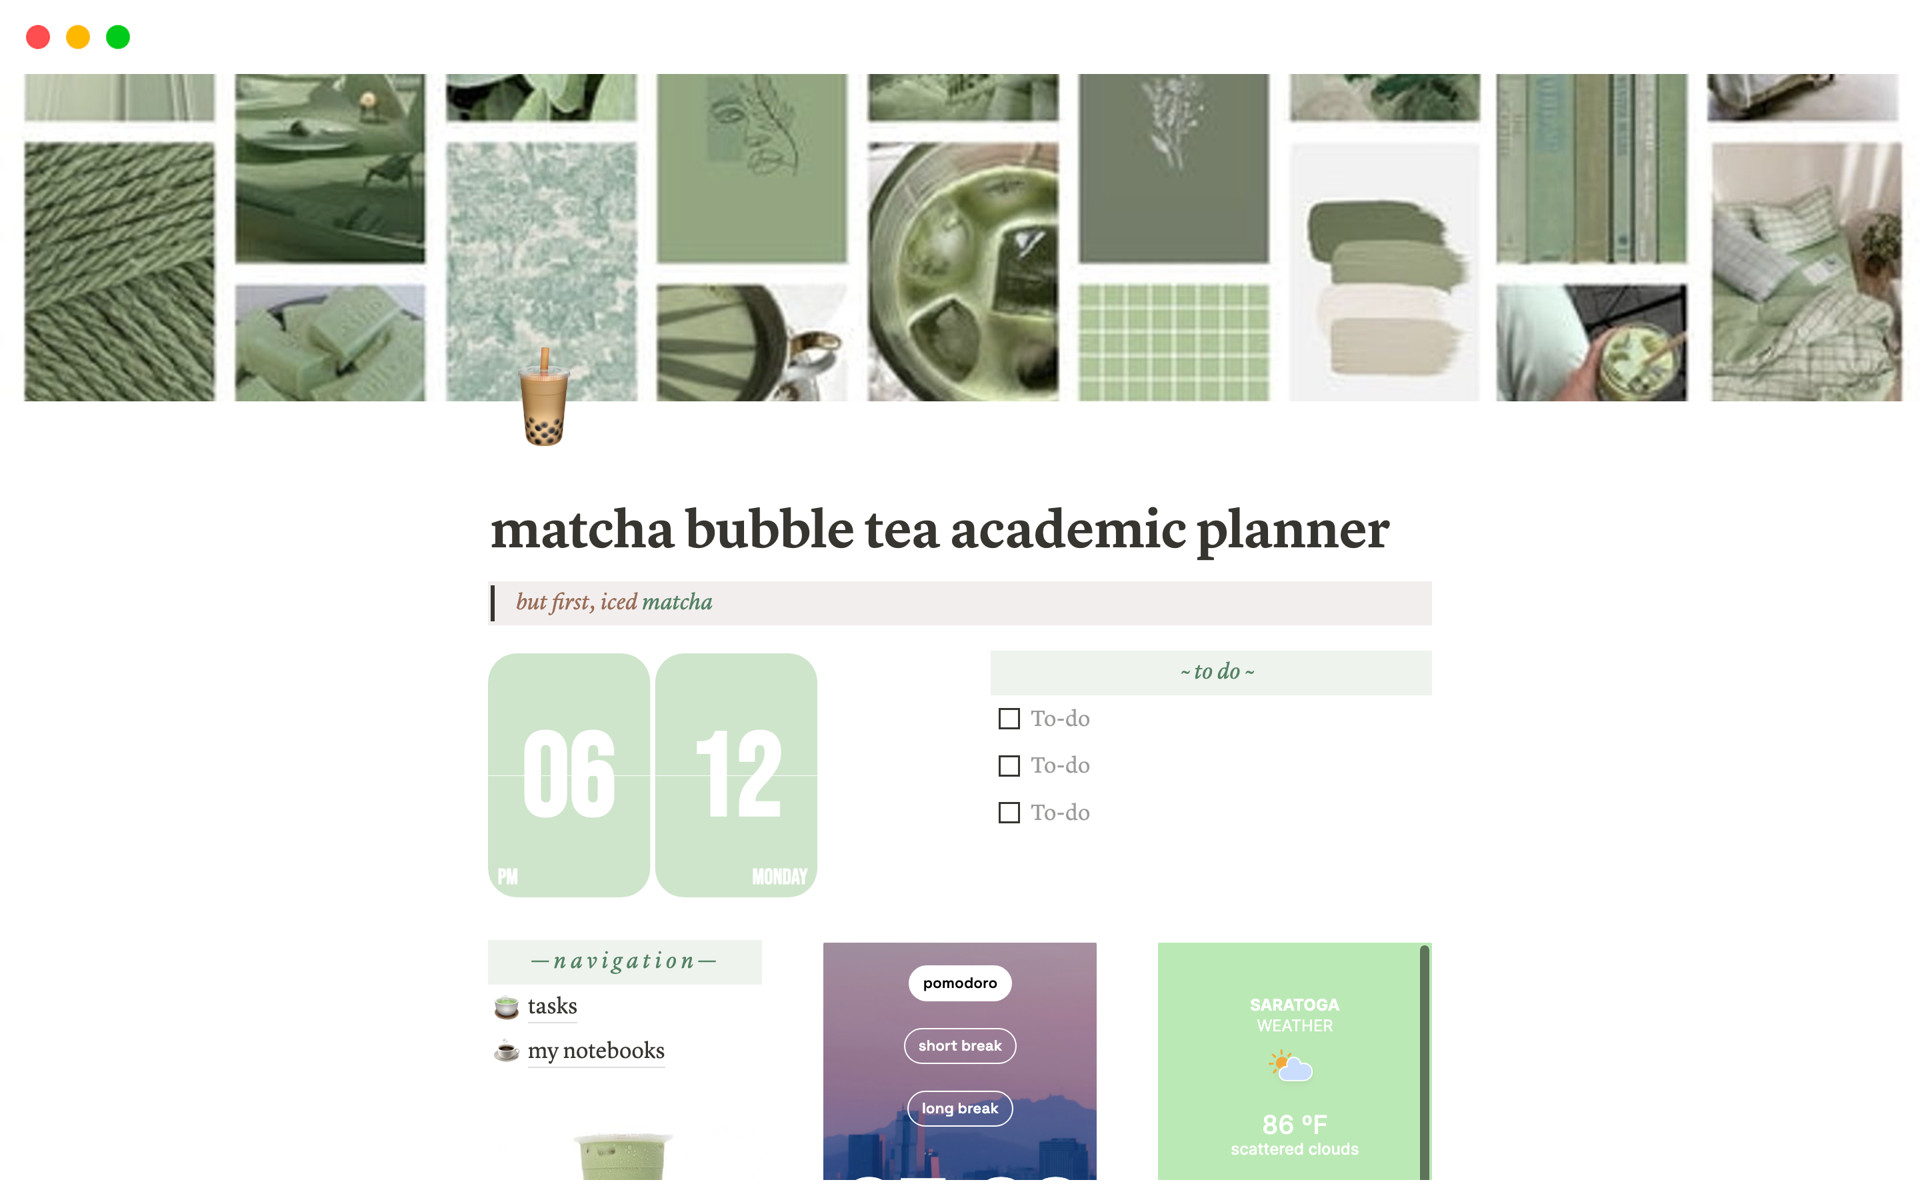 A simple, cute, matcha bubble tea themed academic planner-type thing.